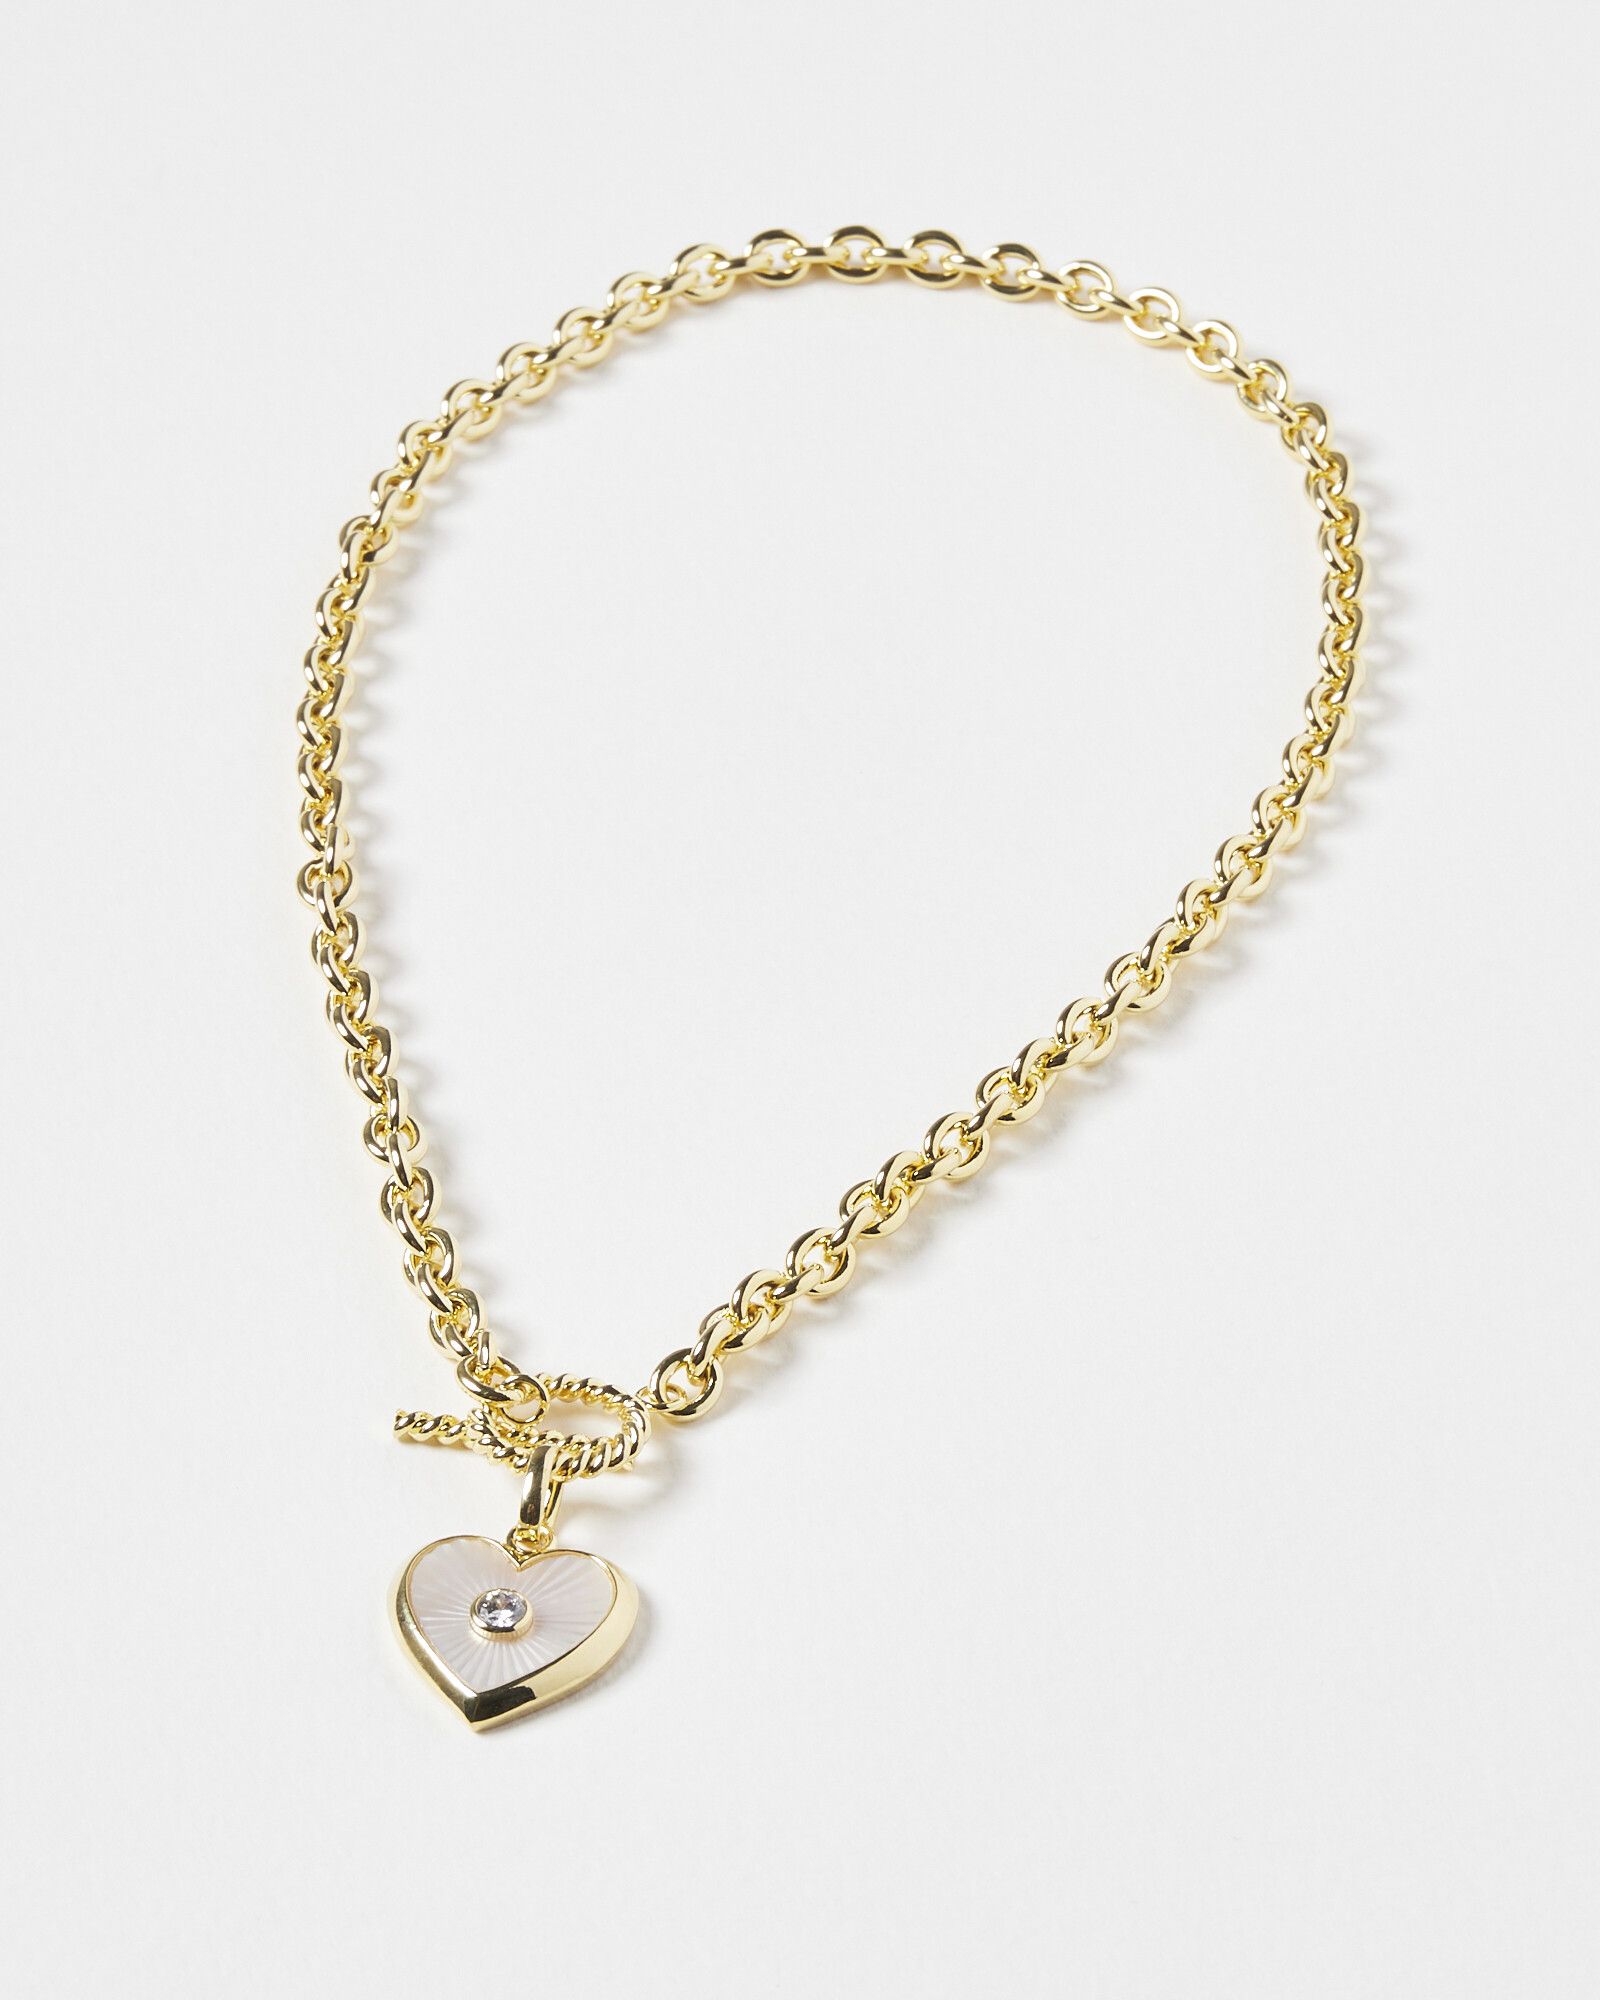 Chanel Style White Pearl Heart Inlaid Zircon Necklace